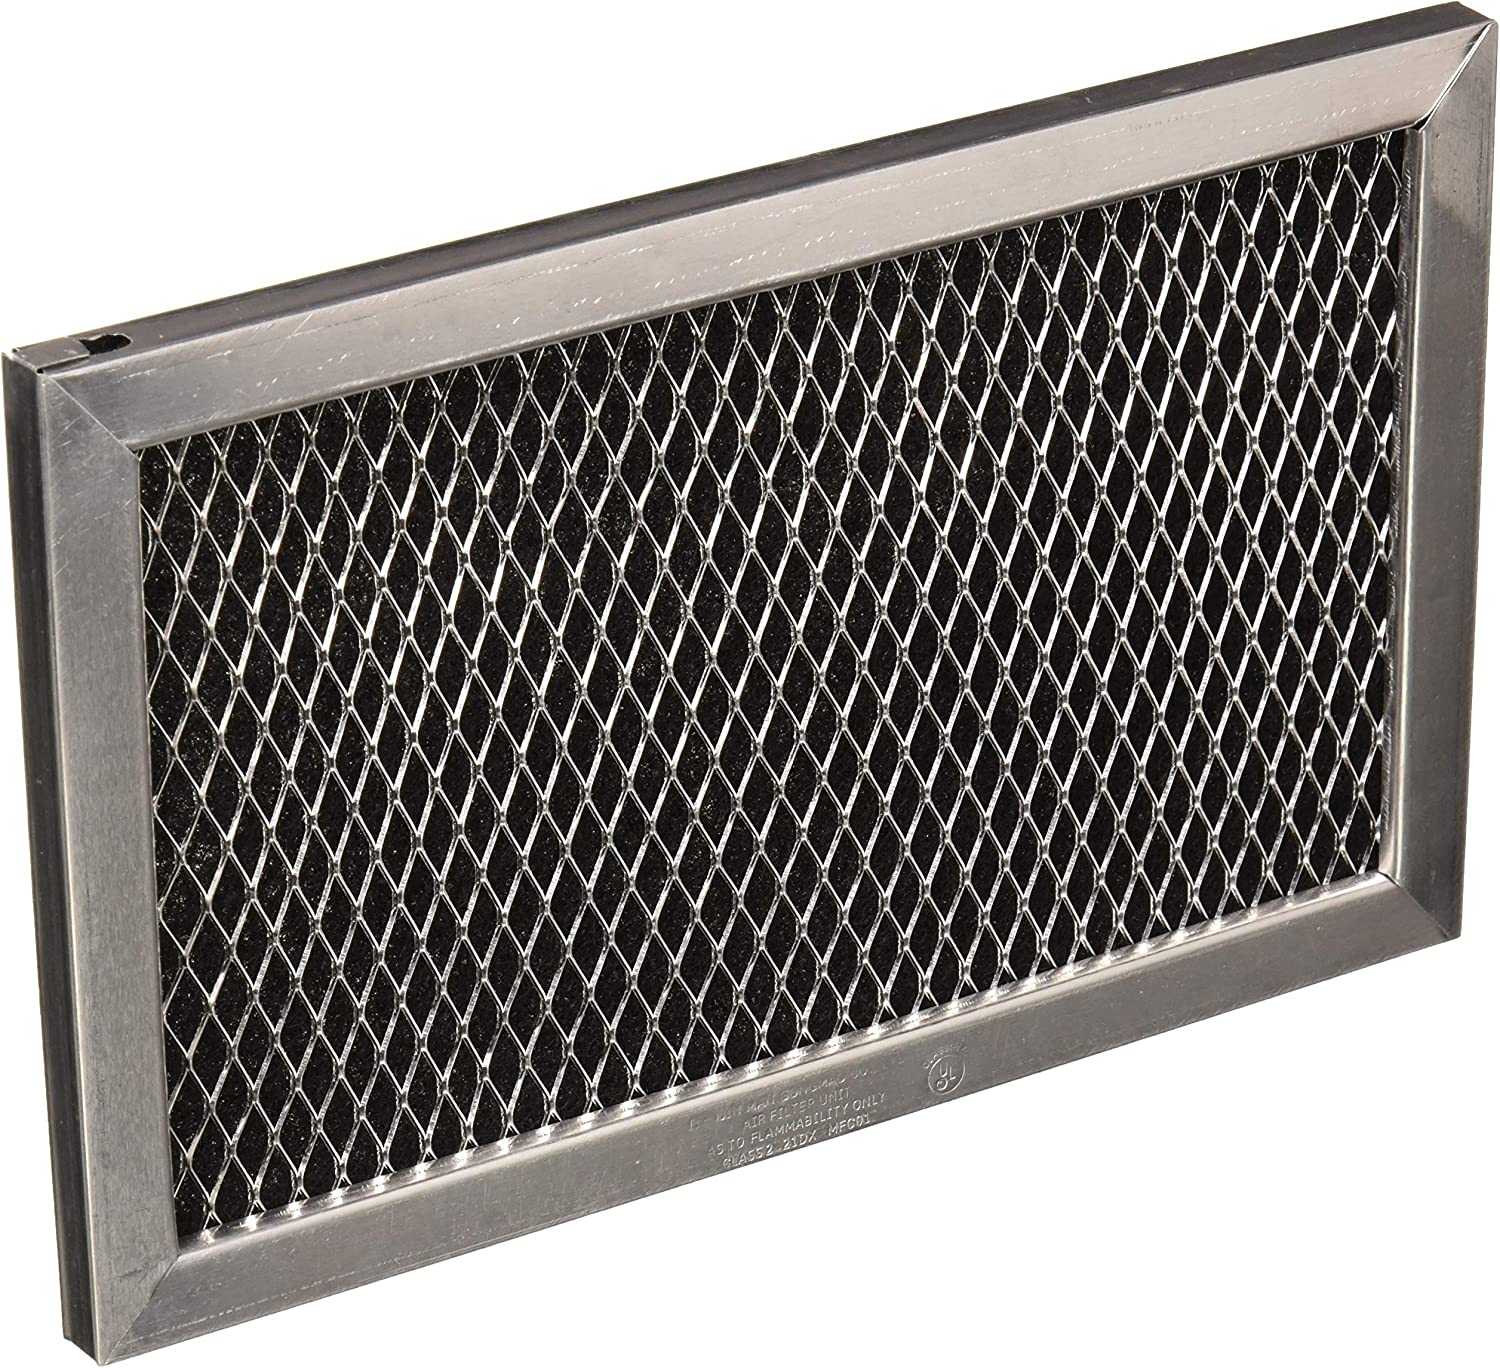 LG Microwave Charcoal Filter. Part #5230W1A011E